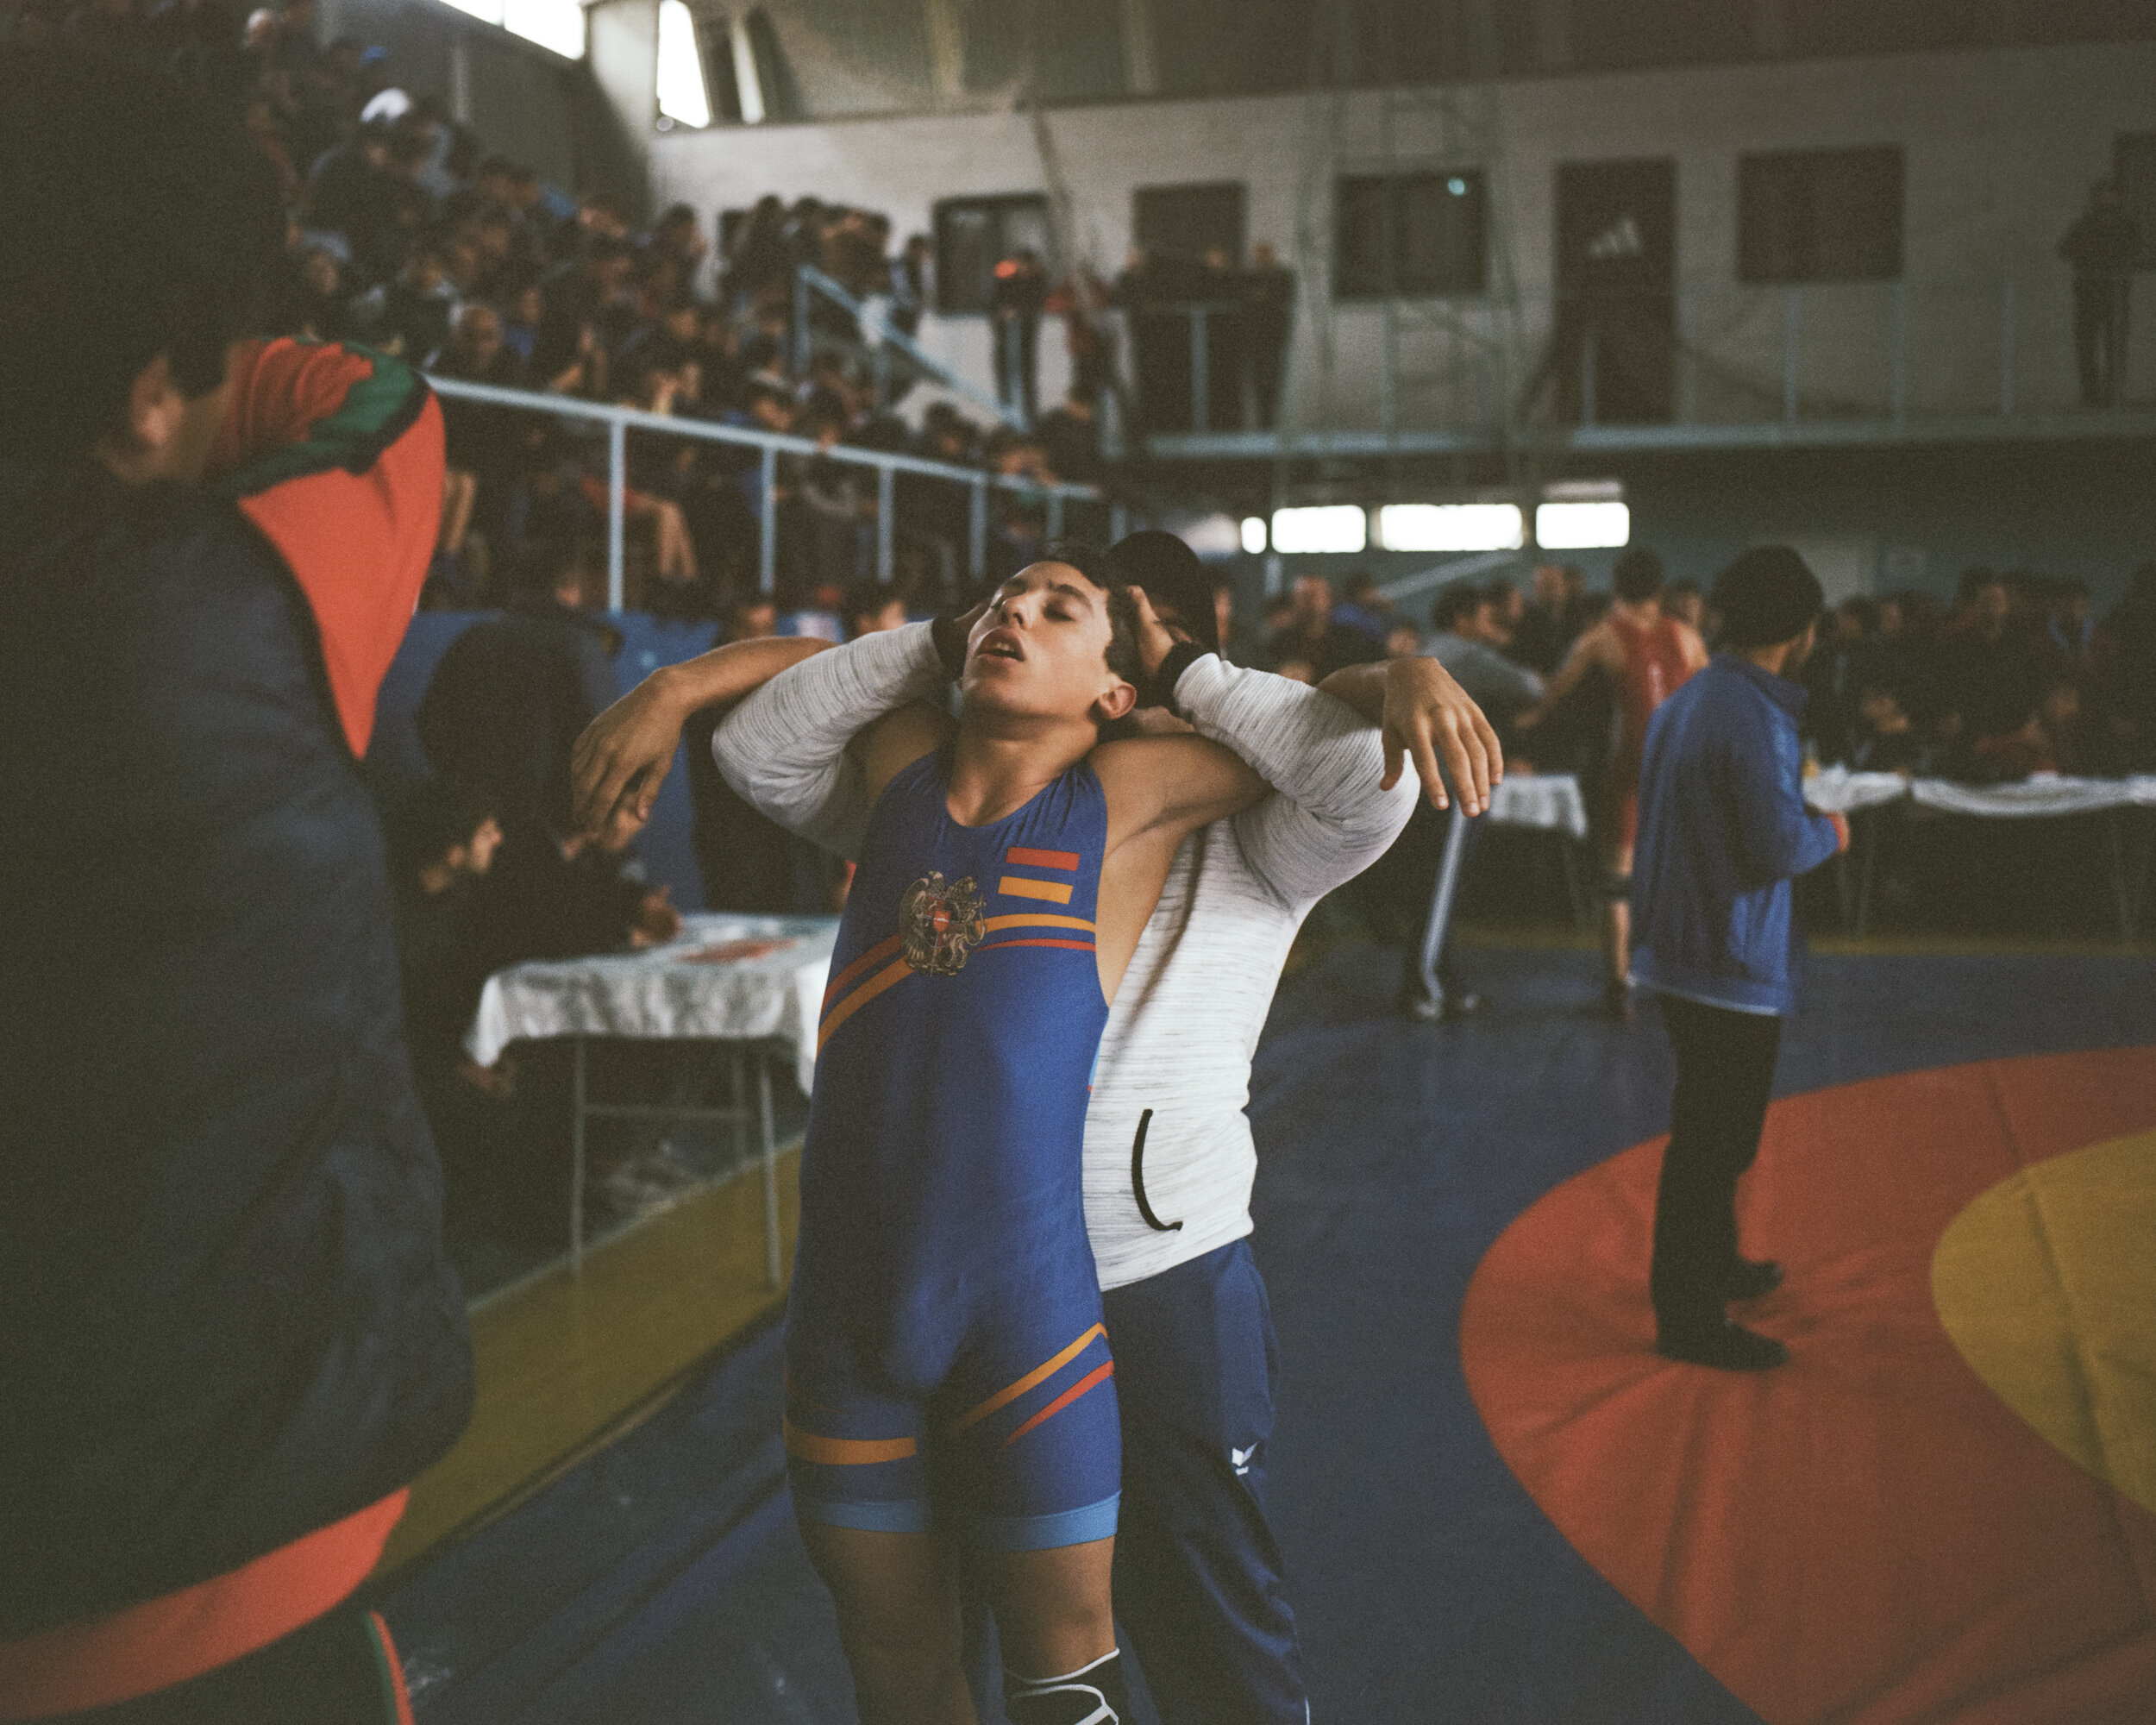   Competitions are crucial for cadets. It is their opportunity to be noticed by coaches of the National Team. They take it very seriously and fight for their last breath.  Gyumri, Armenia, 2018  